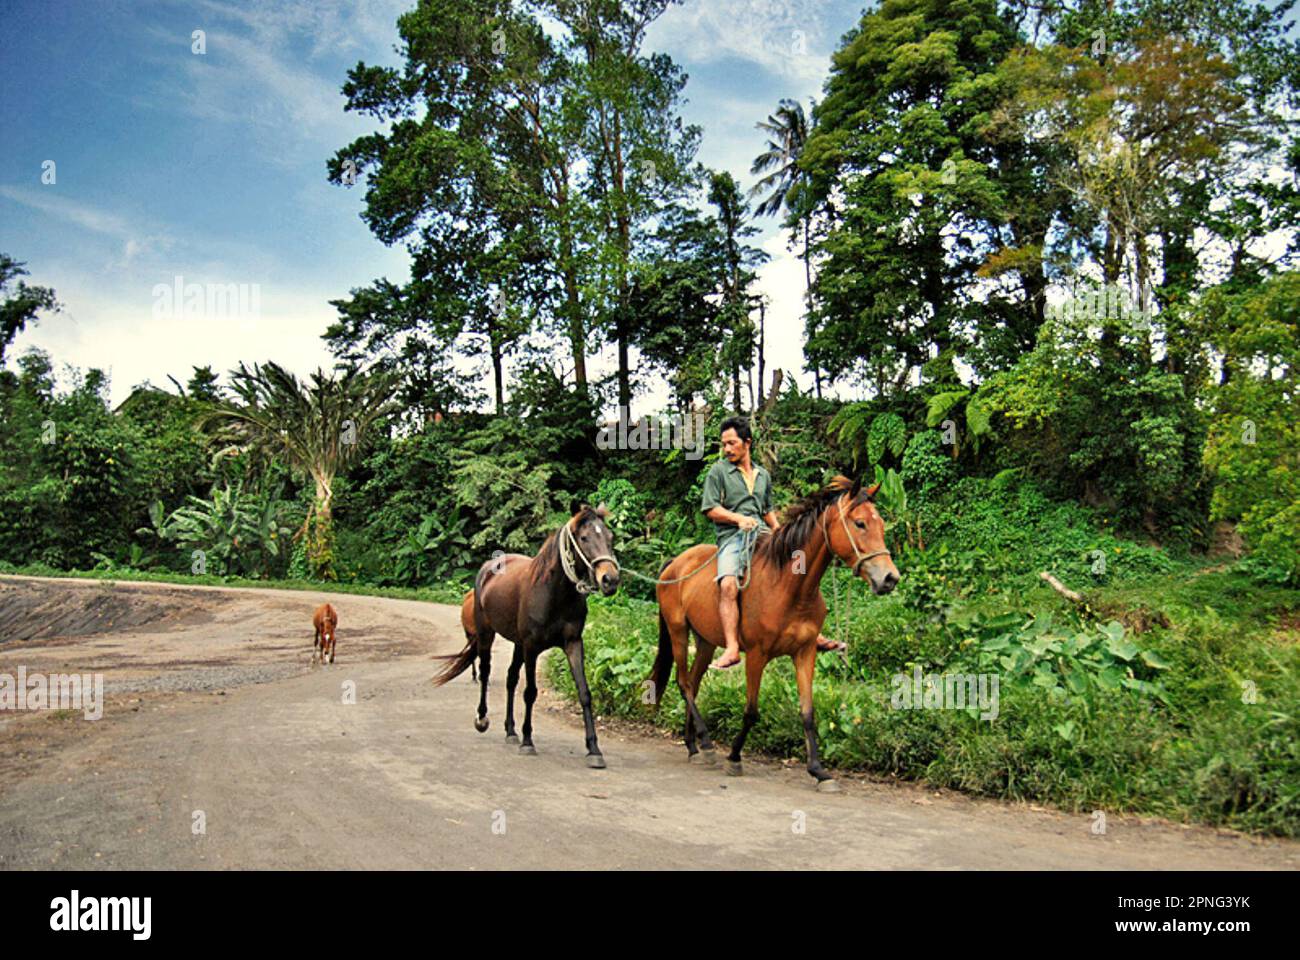 A man rides a sport horse while leading another sport horse on a rural road in Tompaso, an area known for its horse racing tradition Minahasa, North Sulawesi, Indonesia. Stock Photo